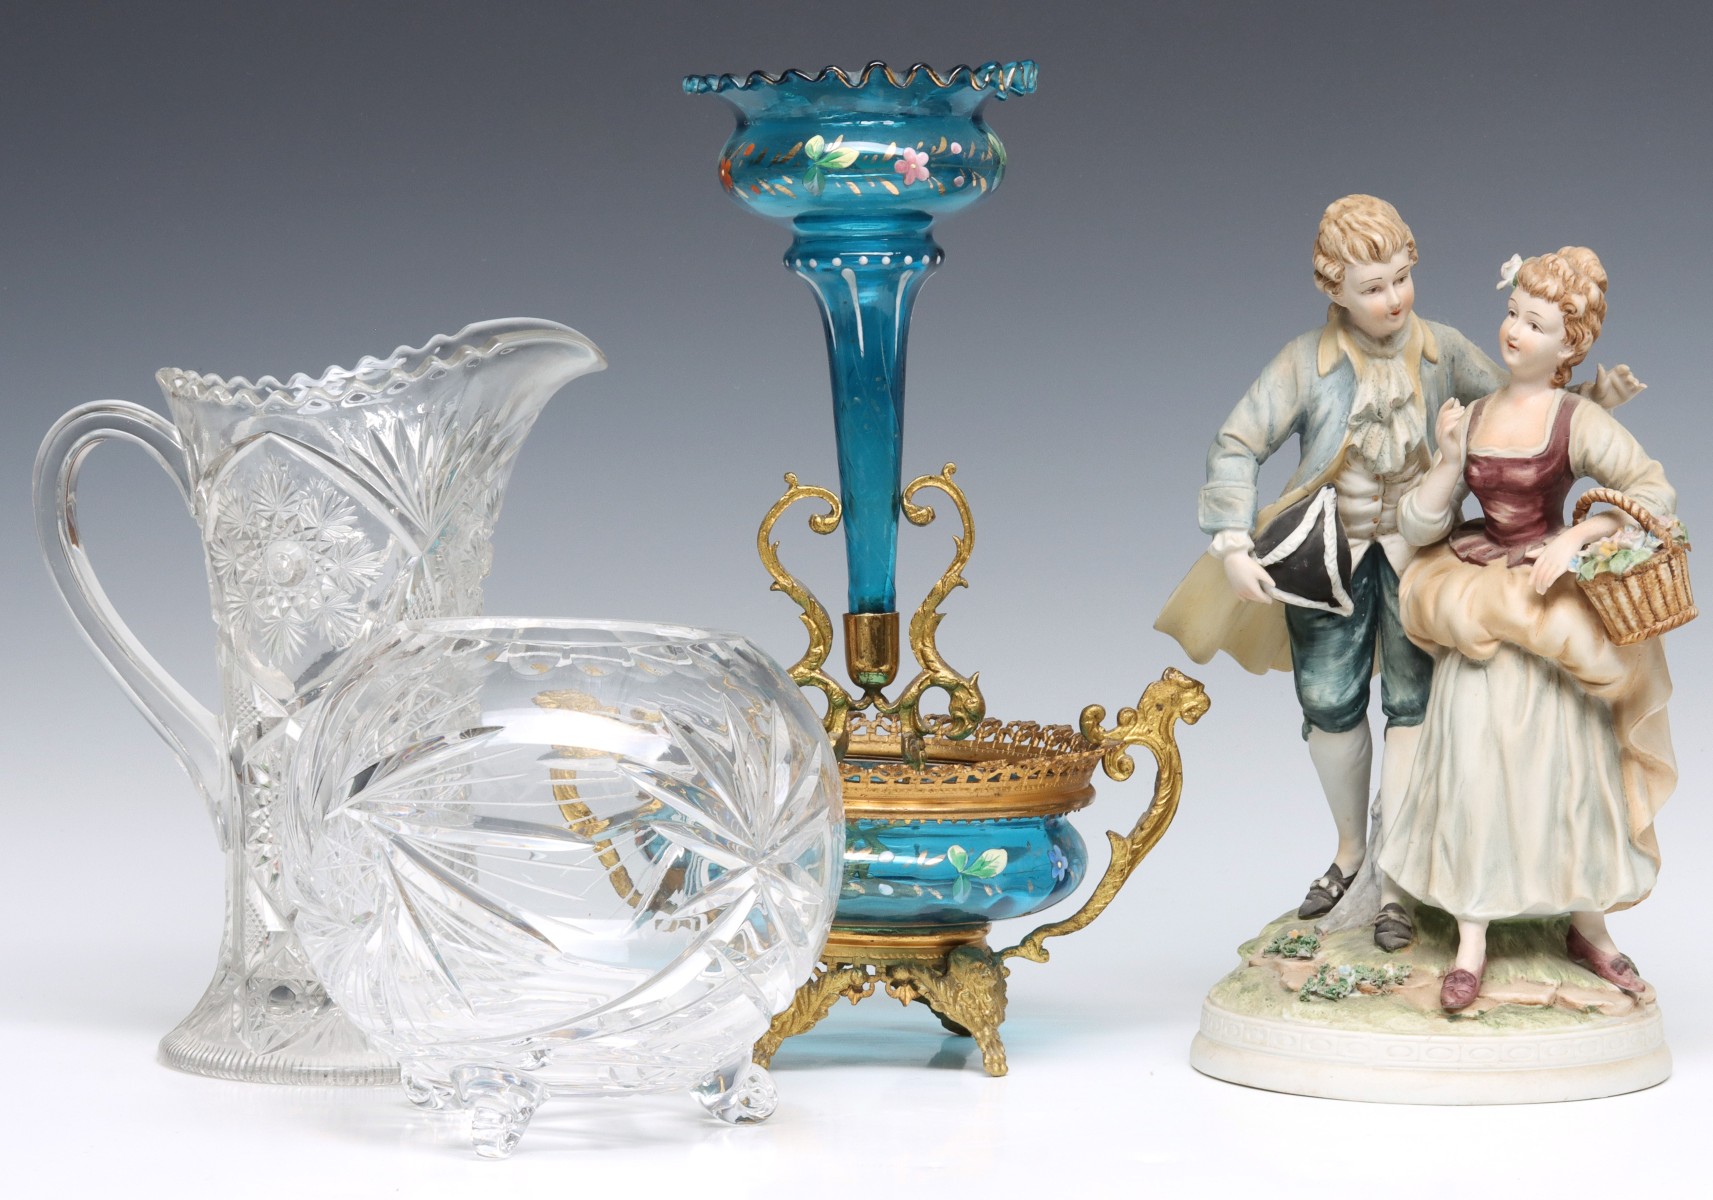 AN ENAMELED VICTORIAN ART GLASS ONE-LILY EPERGNE